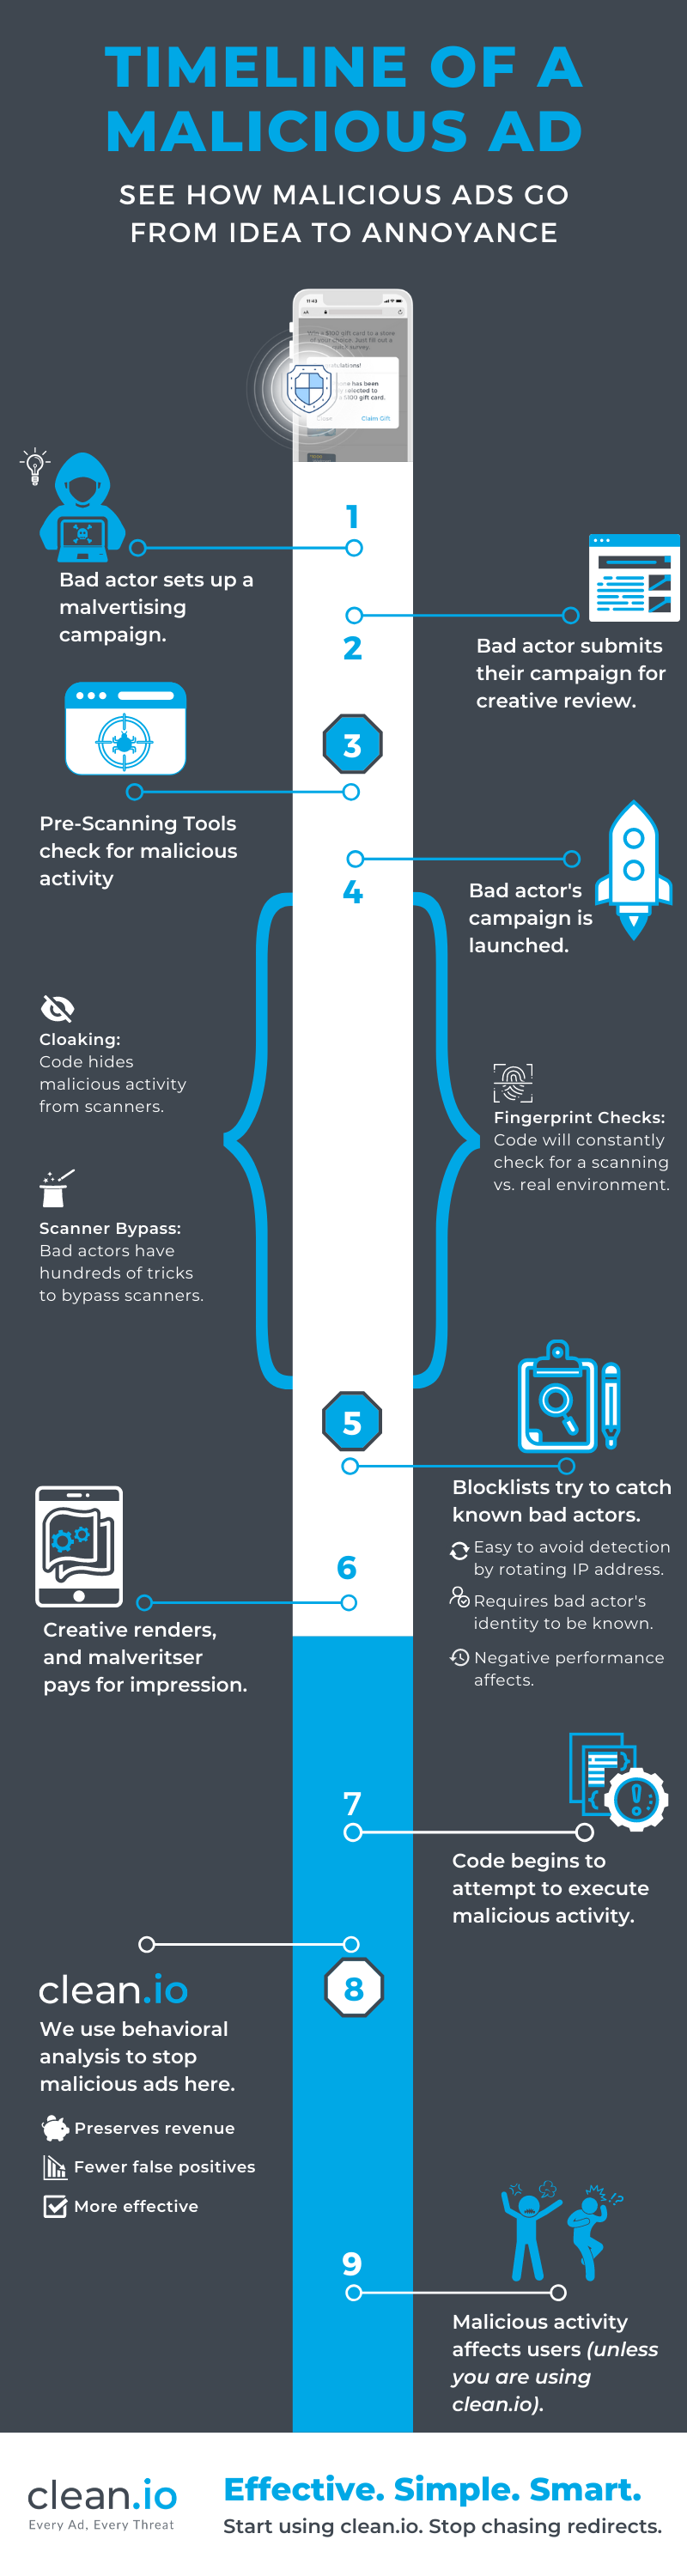 Clean.io-Publisher-Infographic-malicious timeline